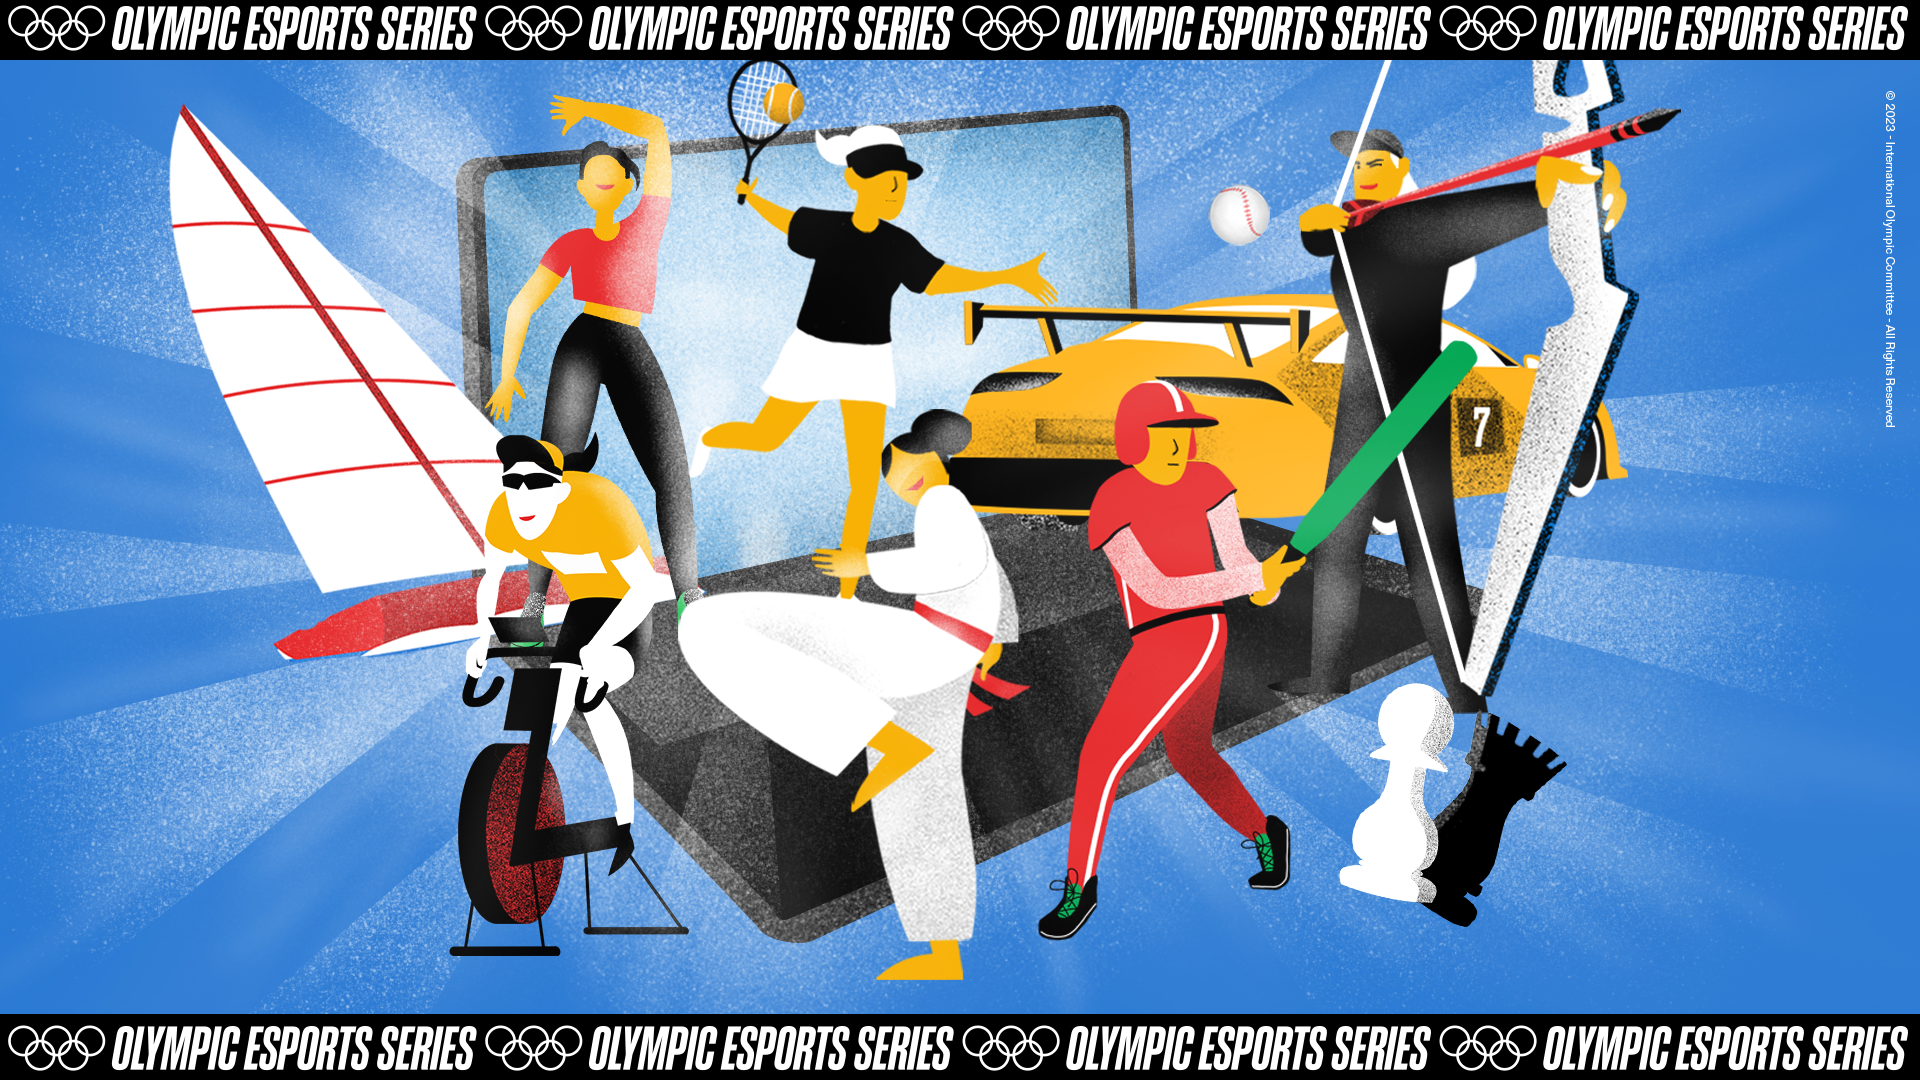 Illustration of a baseball player, cyclist and archer, among other athletes. A banner below them shows the words: Olympic esports series